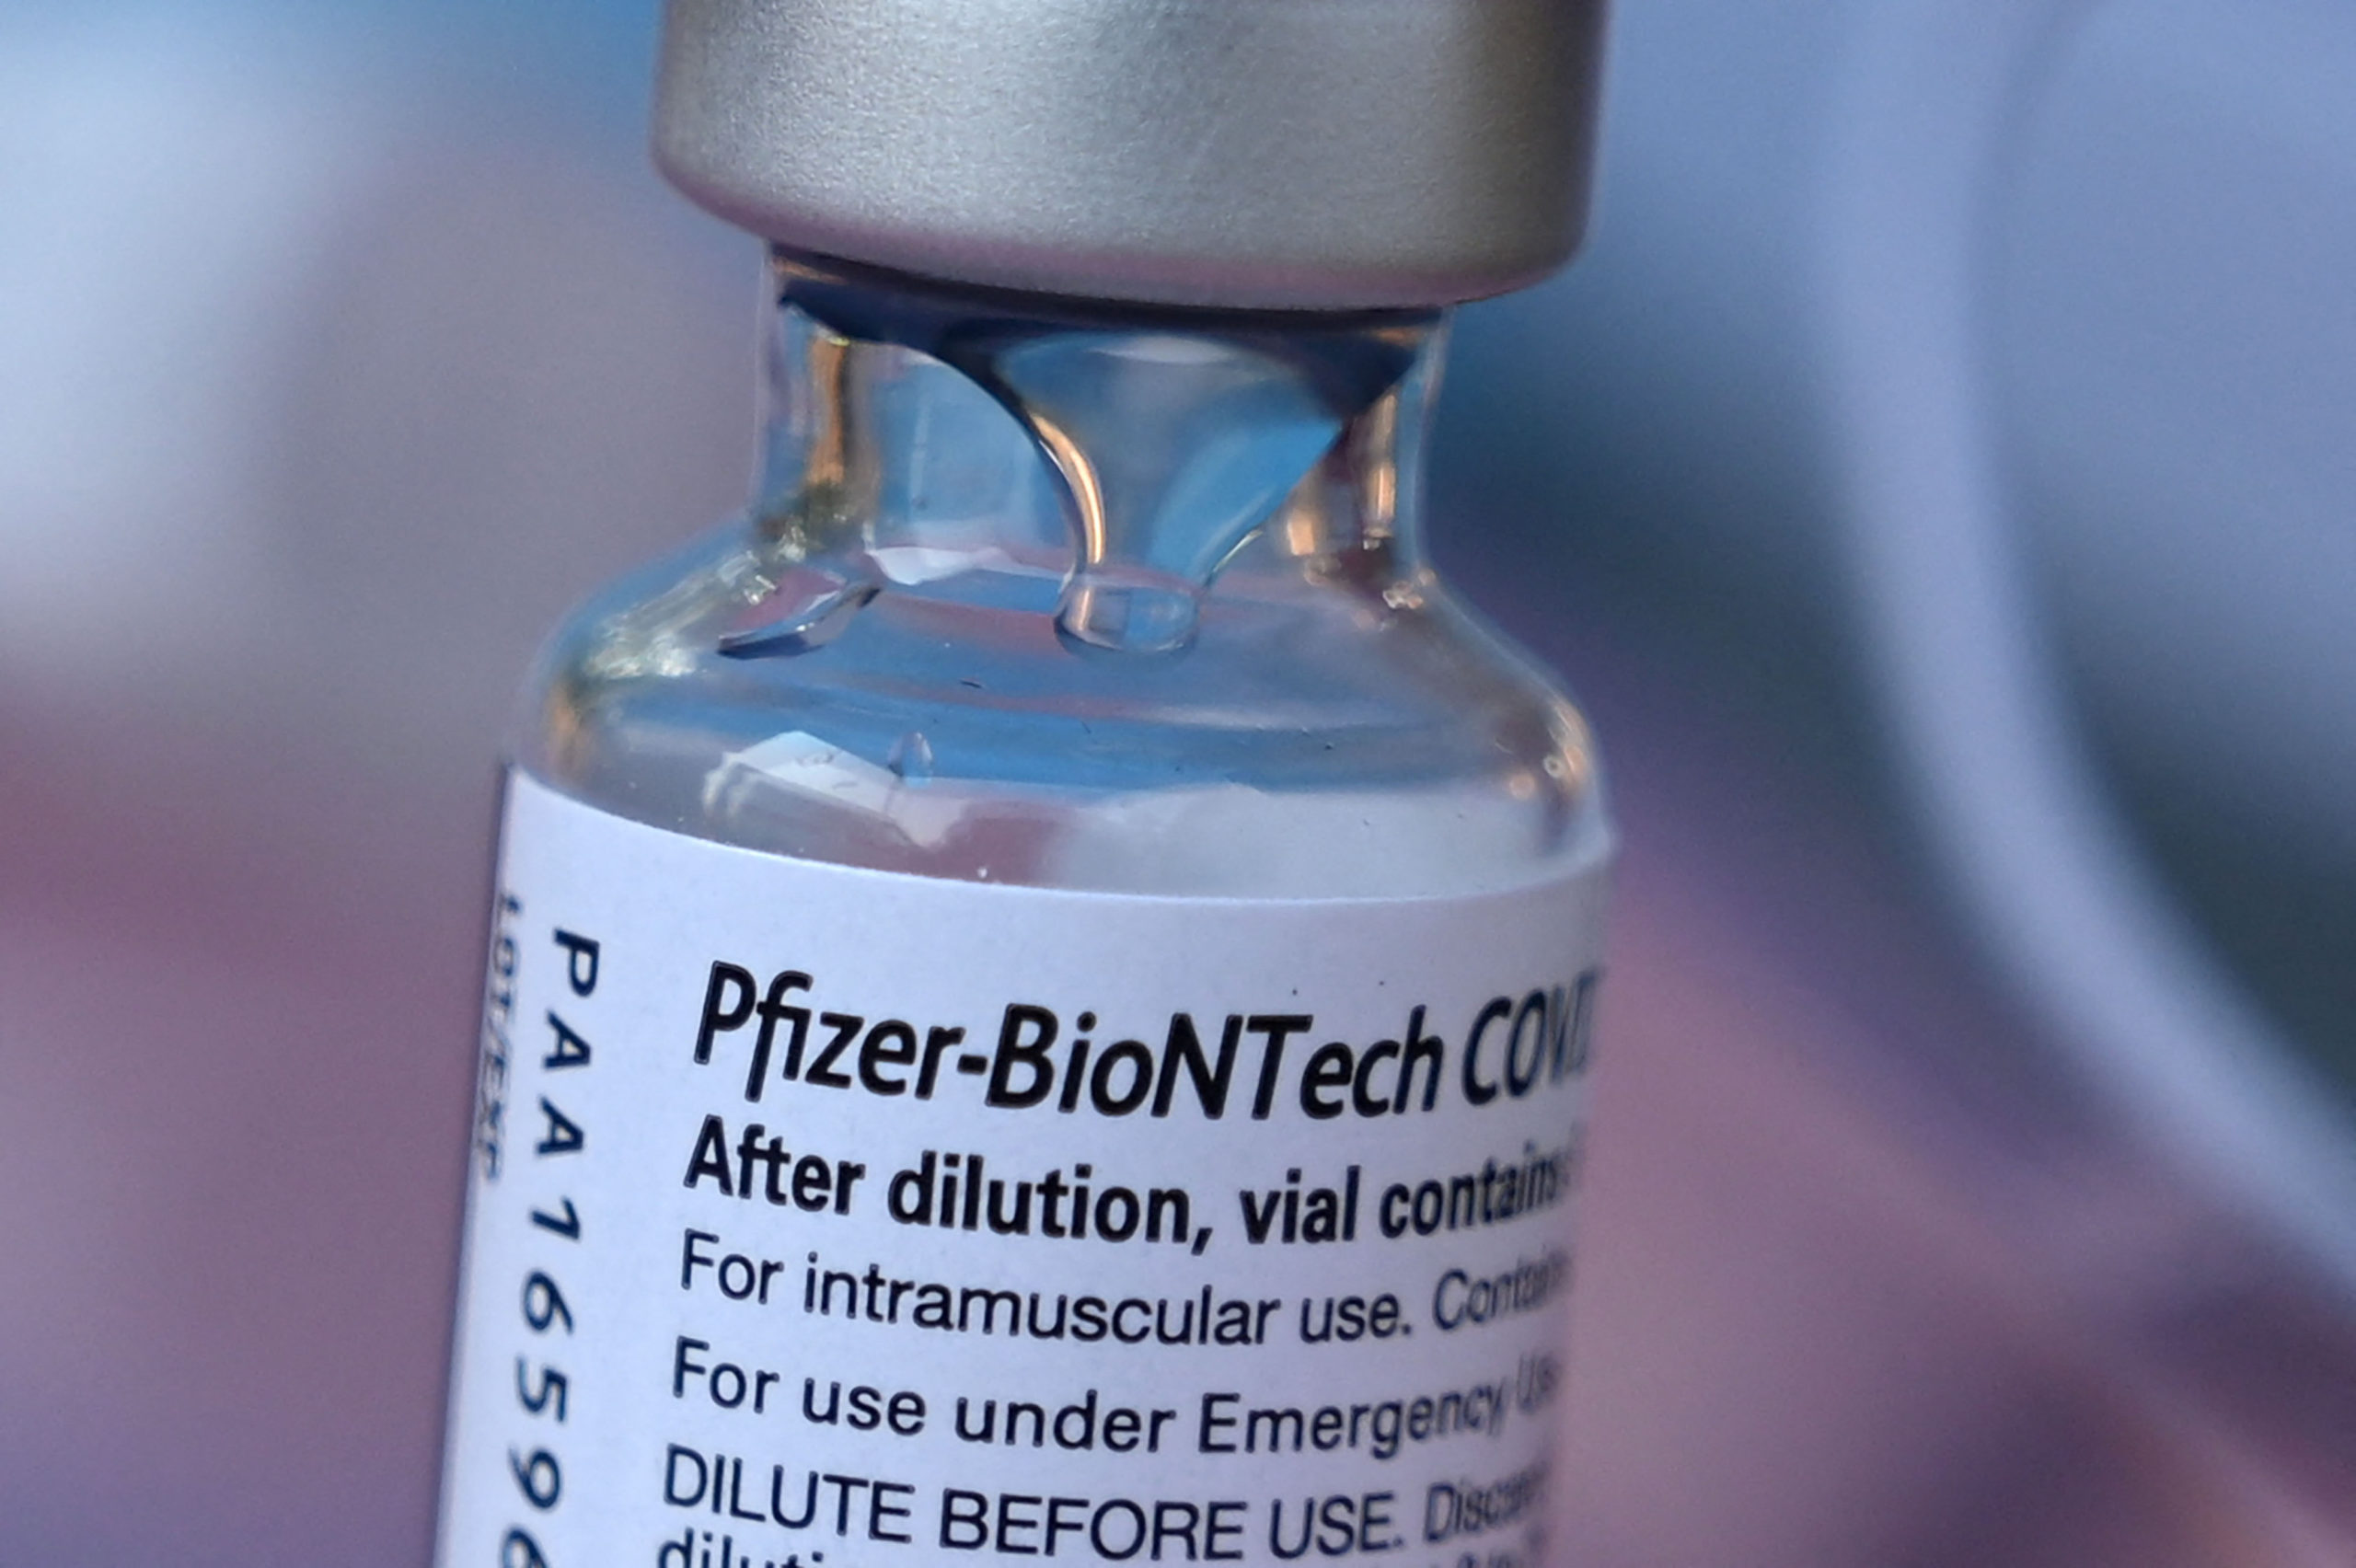 A vial of Pfizer-BioNTech Covid-19 vaccine is seen at a pop up vaccine clinic in the Arleta neighborhood of Los Angeles, California, August 23, 2021. - The US Food and Drug Administration on August 23, fully approved the Pfizer-BioNTech Covid shot, triggering a new wave of vaccine mandates as the Delta variant batters the country.